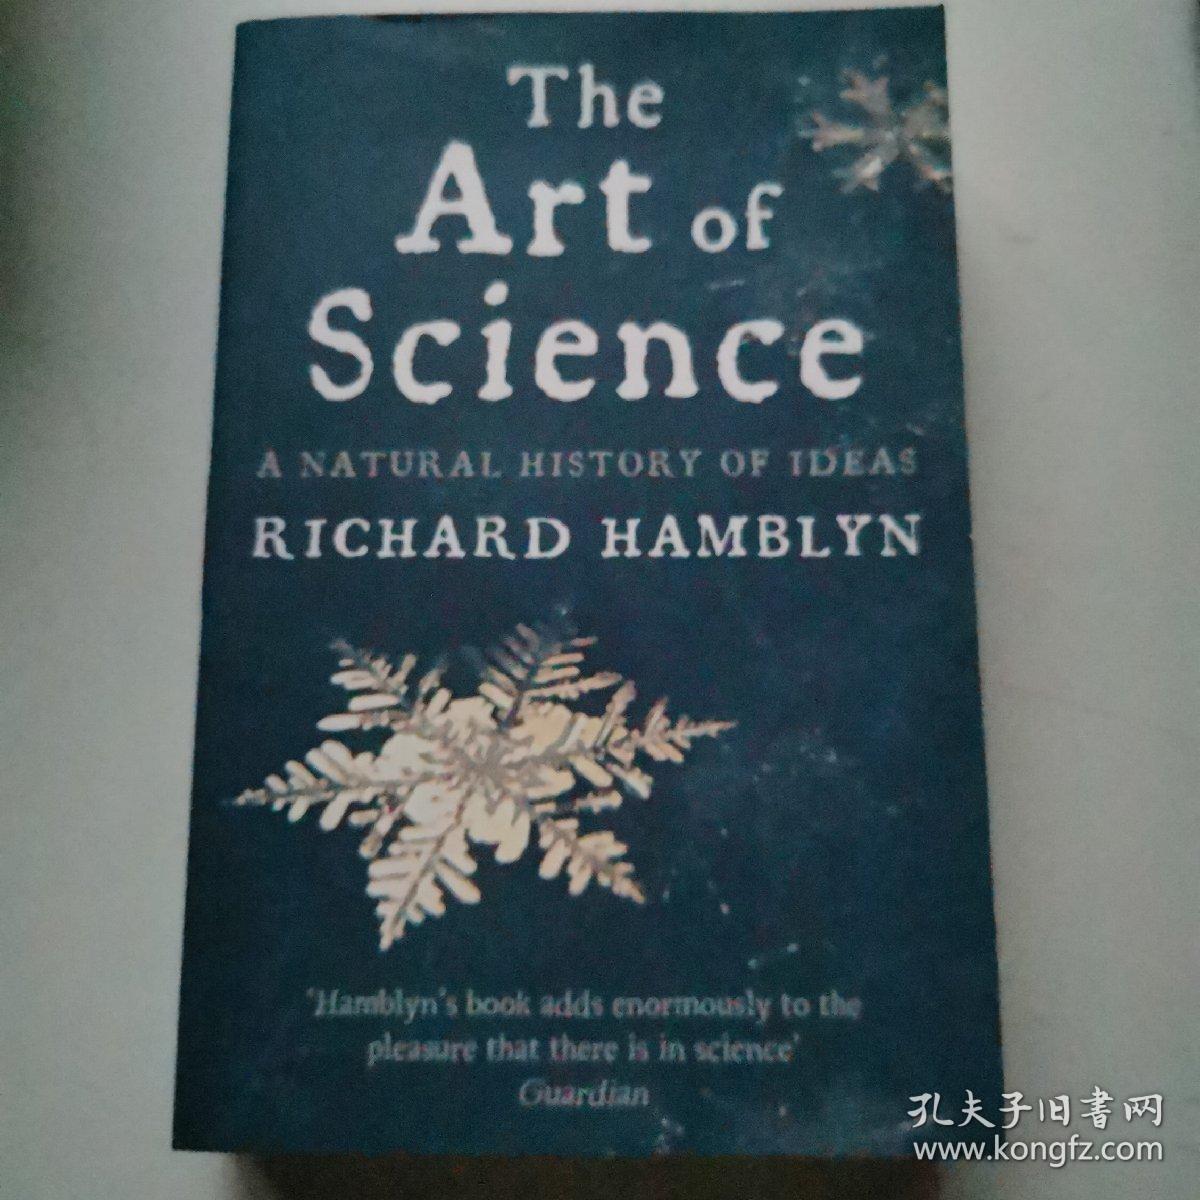 The Art of Science: A Natural History of Ideas [科学的艺术：思想的自然史]